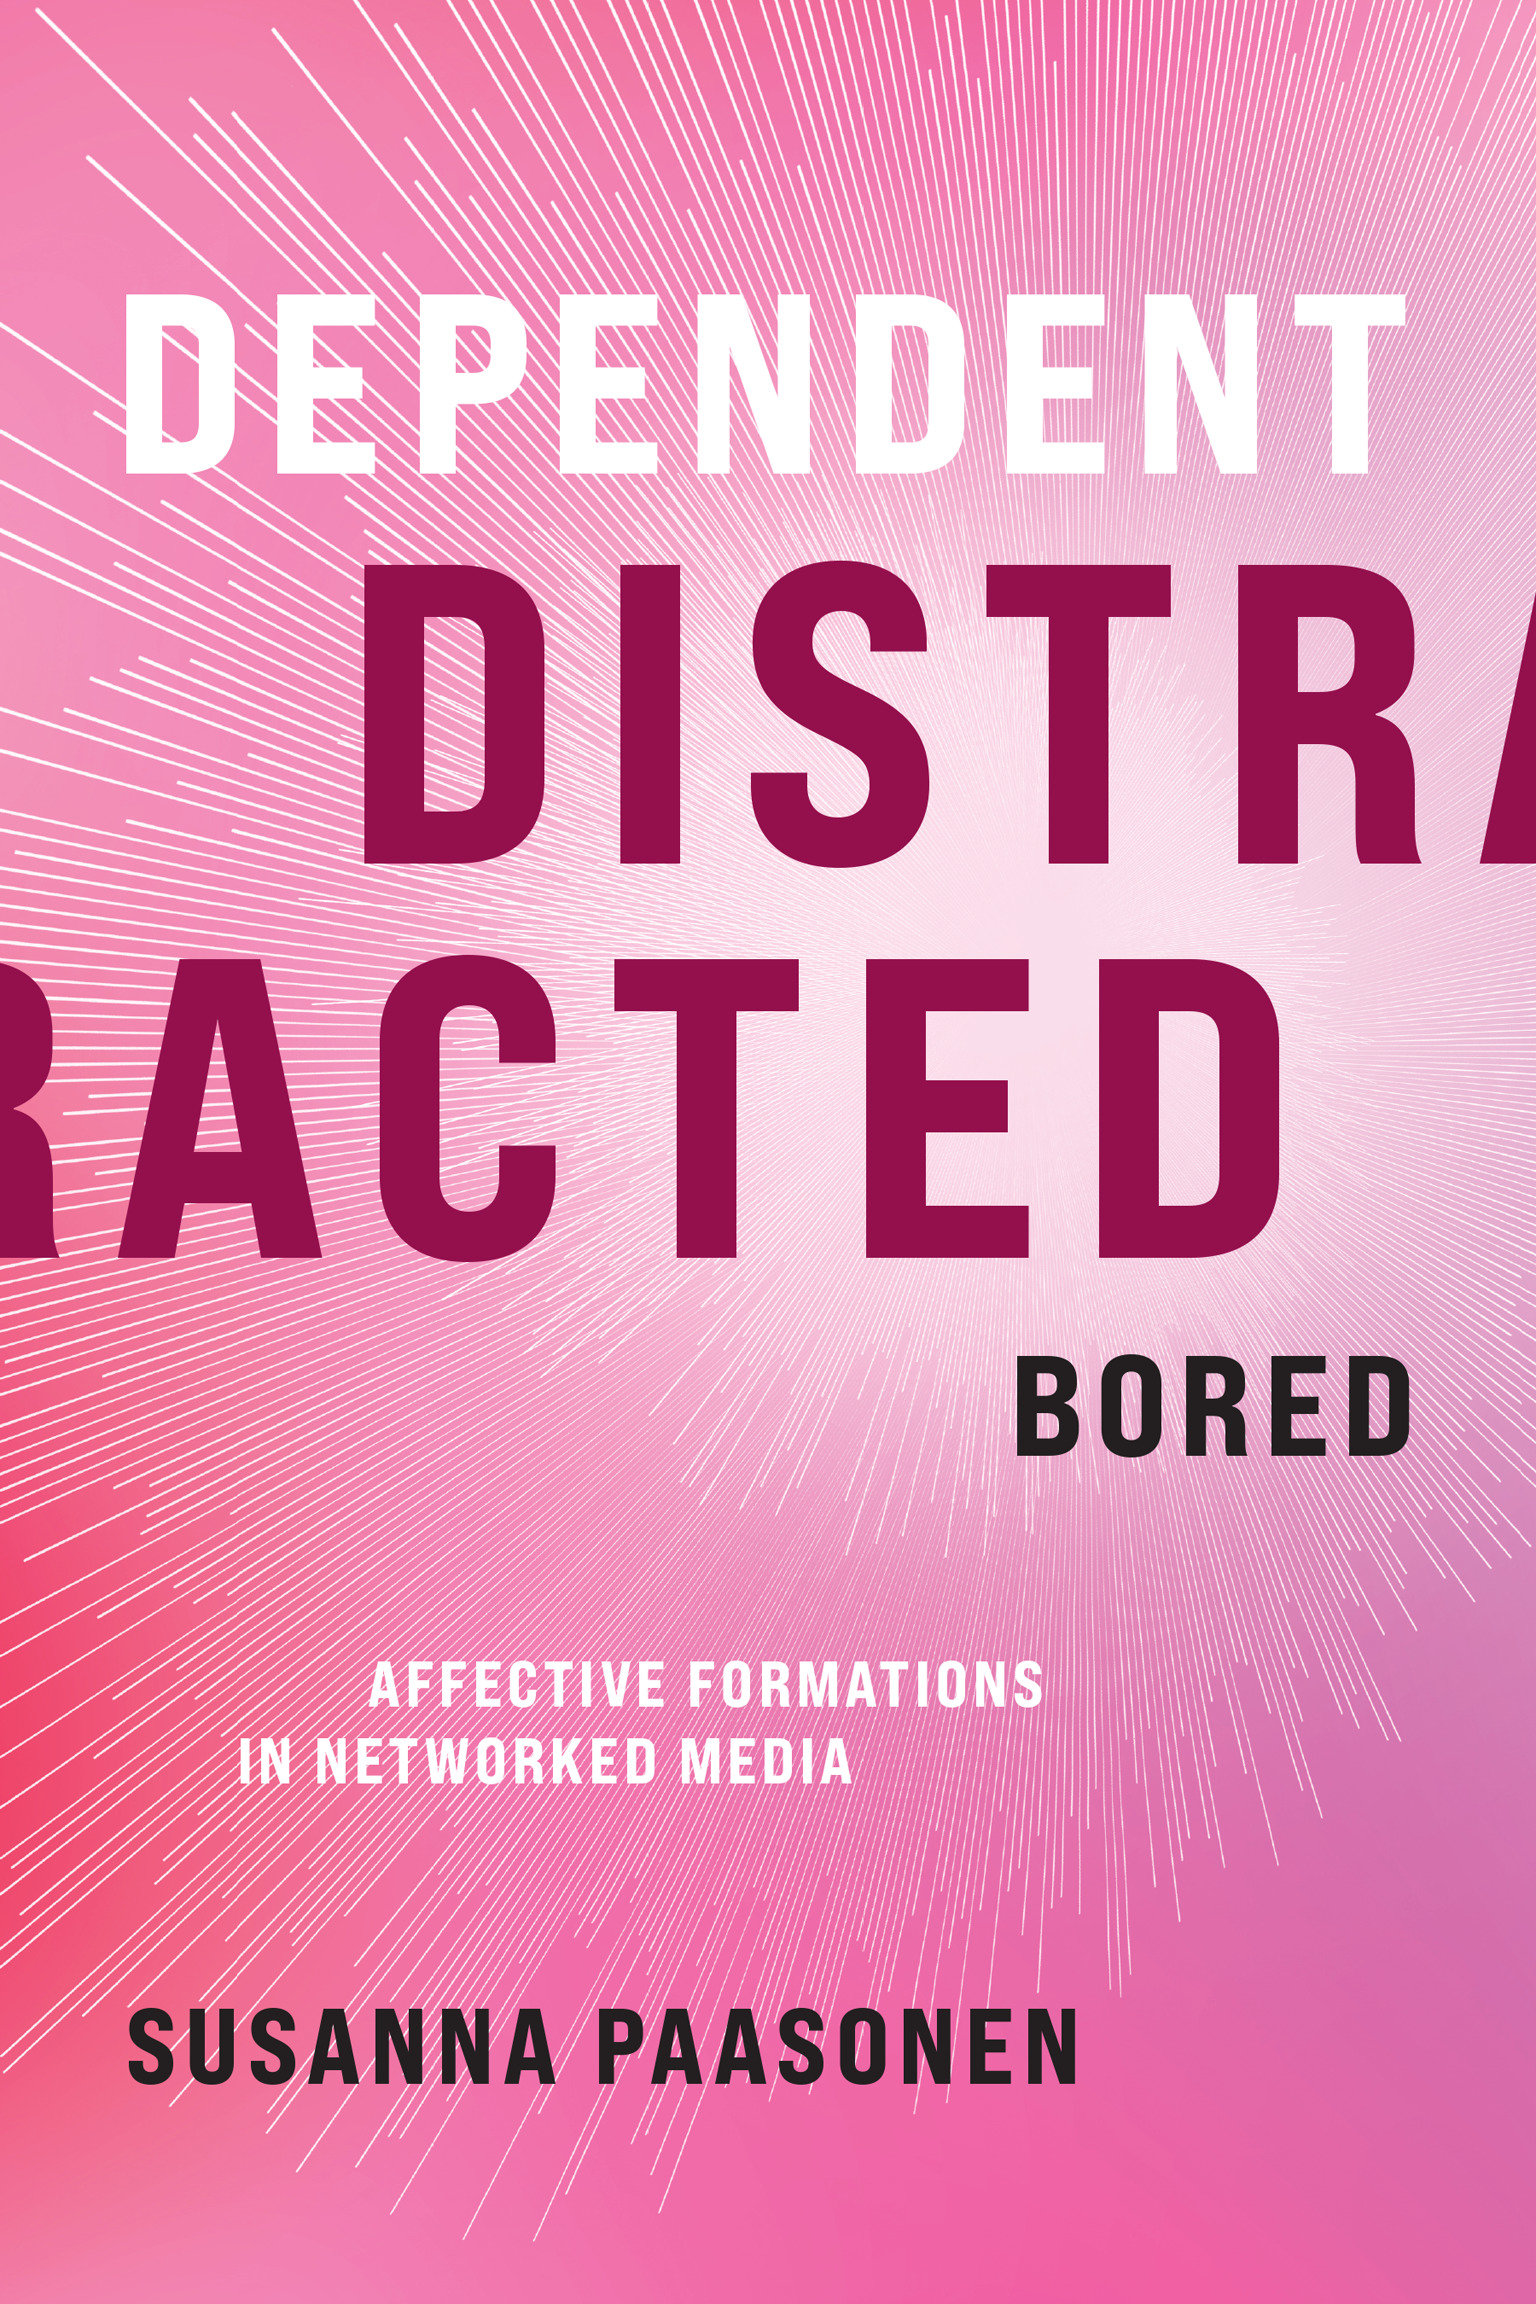 Dependent, Distracted, Bored (Hardcover Book)